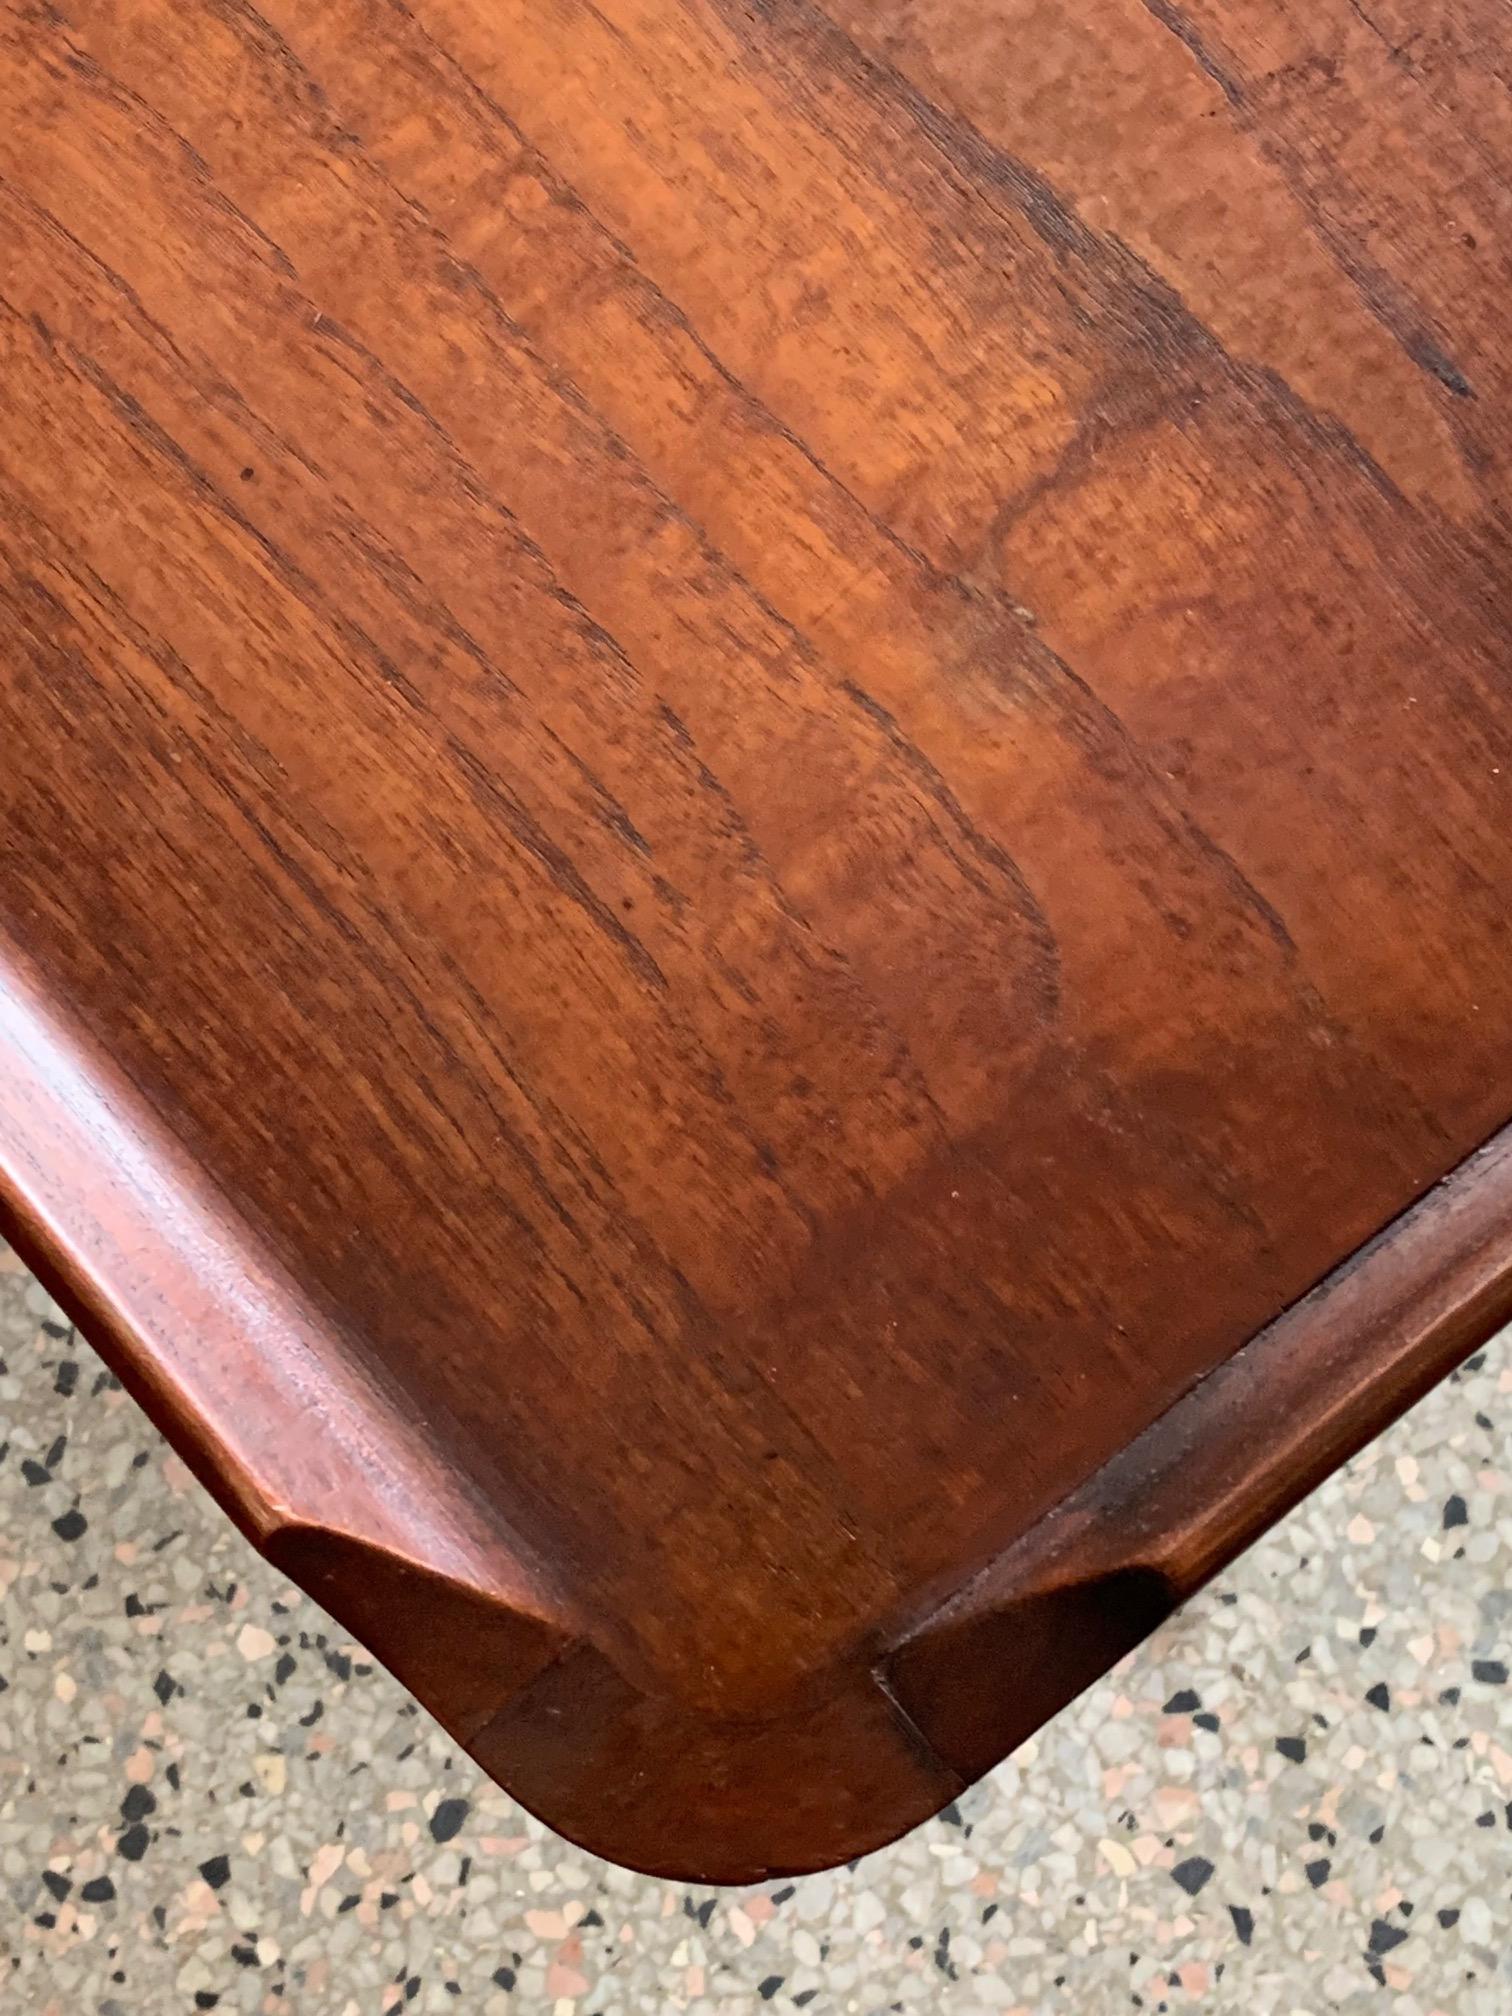 A rare and unusual coffee table with solid raised edges and architectural details, by Jorgen Clausen for Brande Mobelfabrik, Denmark, circa 1950s. Beautiful patina and rich graining.